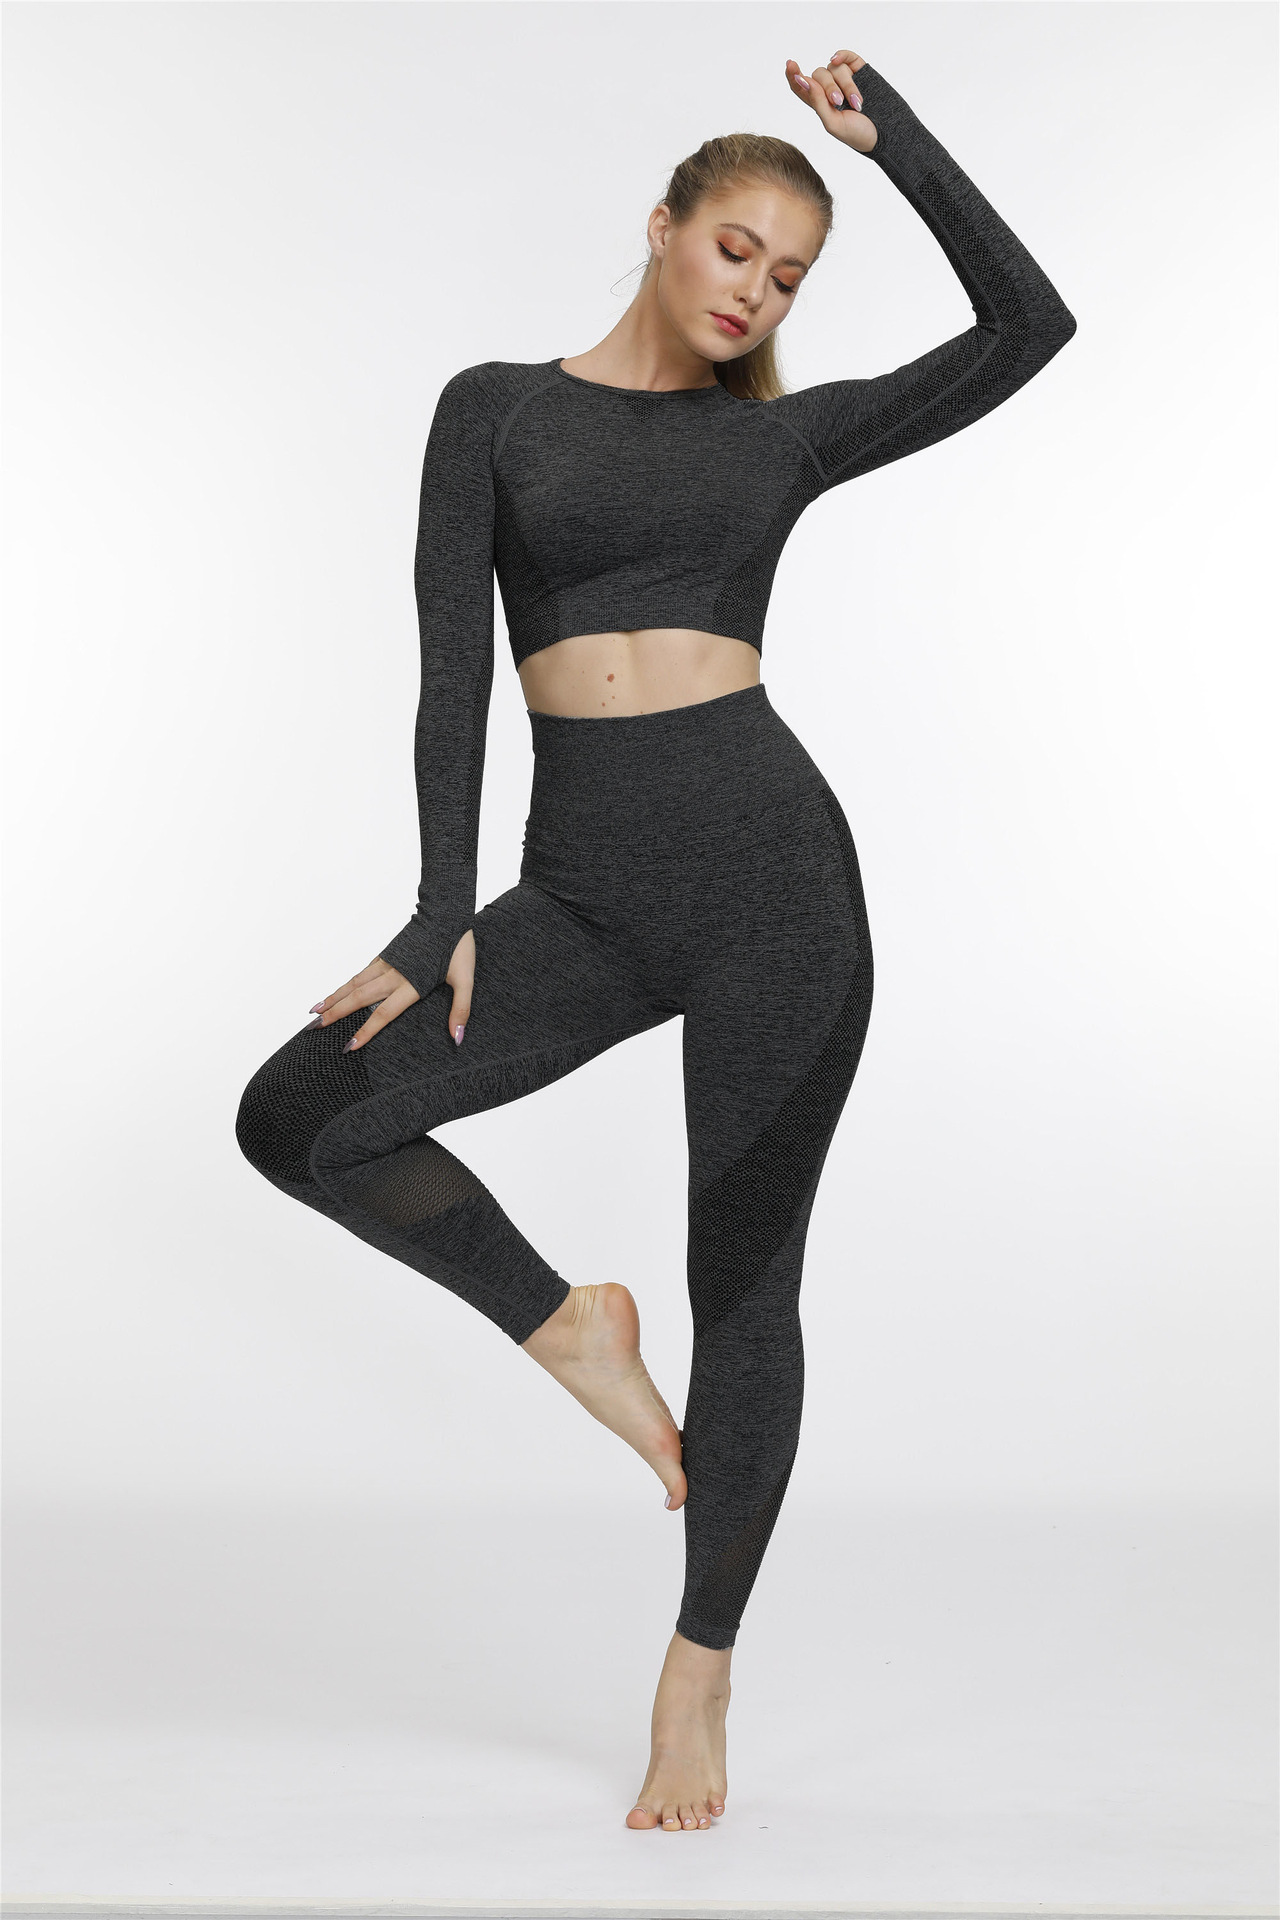 Gym Bunny Legging/Tights – Welcome To Peach Active Wear